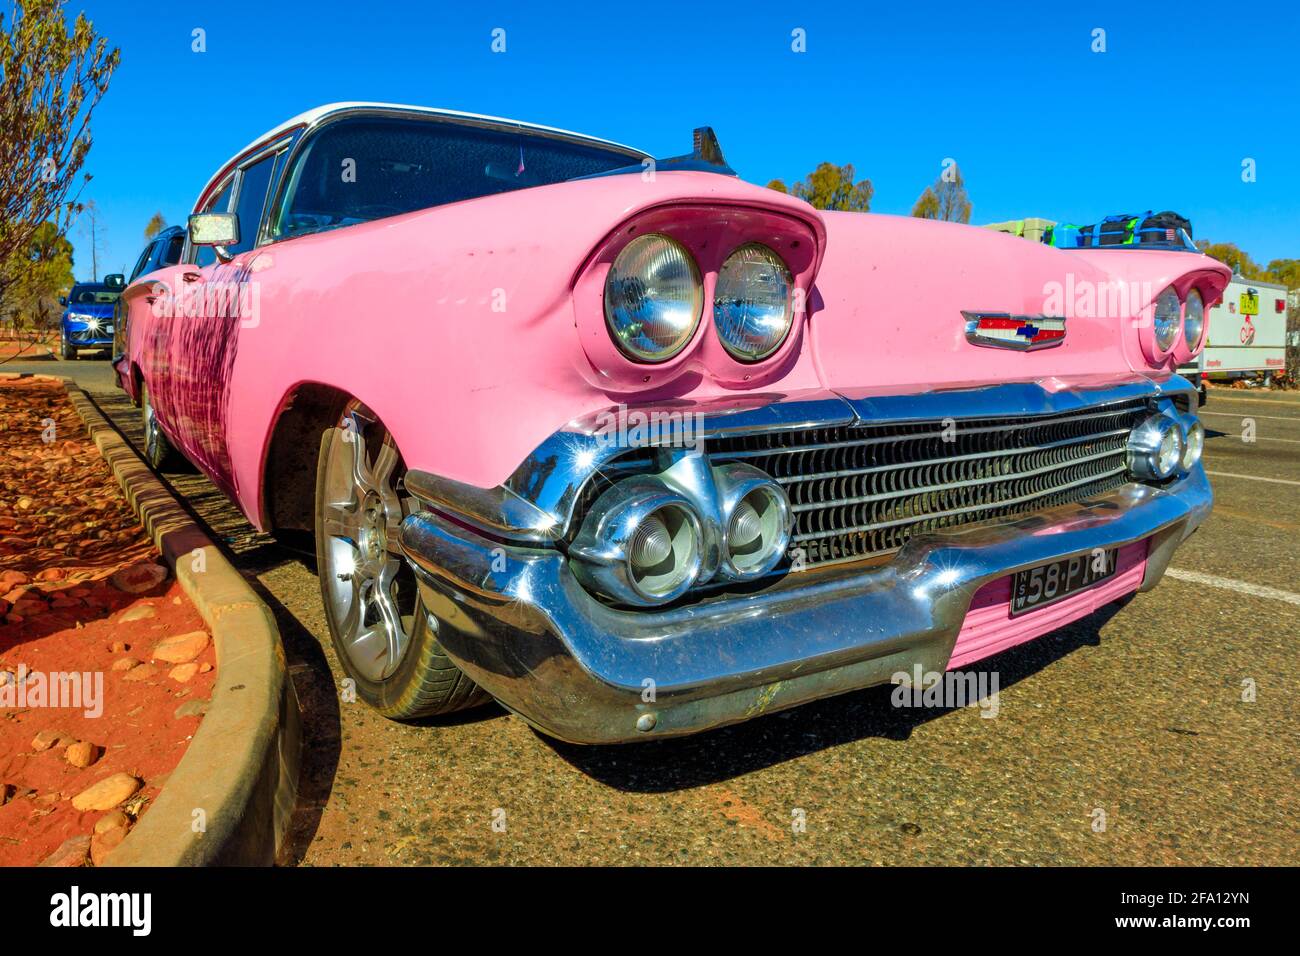 Yulara, Northern Territory, Australia - Aug 24, 2019: front view of luxurious vintage pink Chevrolet Bel Air III car. Famous classic car made in 1958 Stock Photo